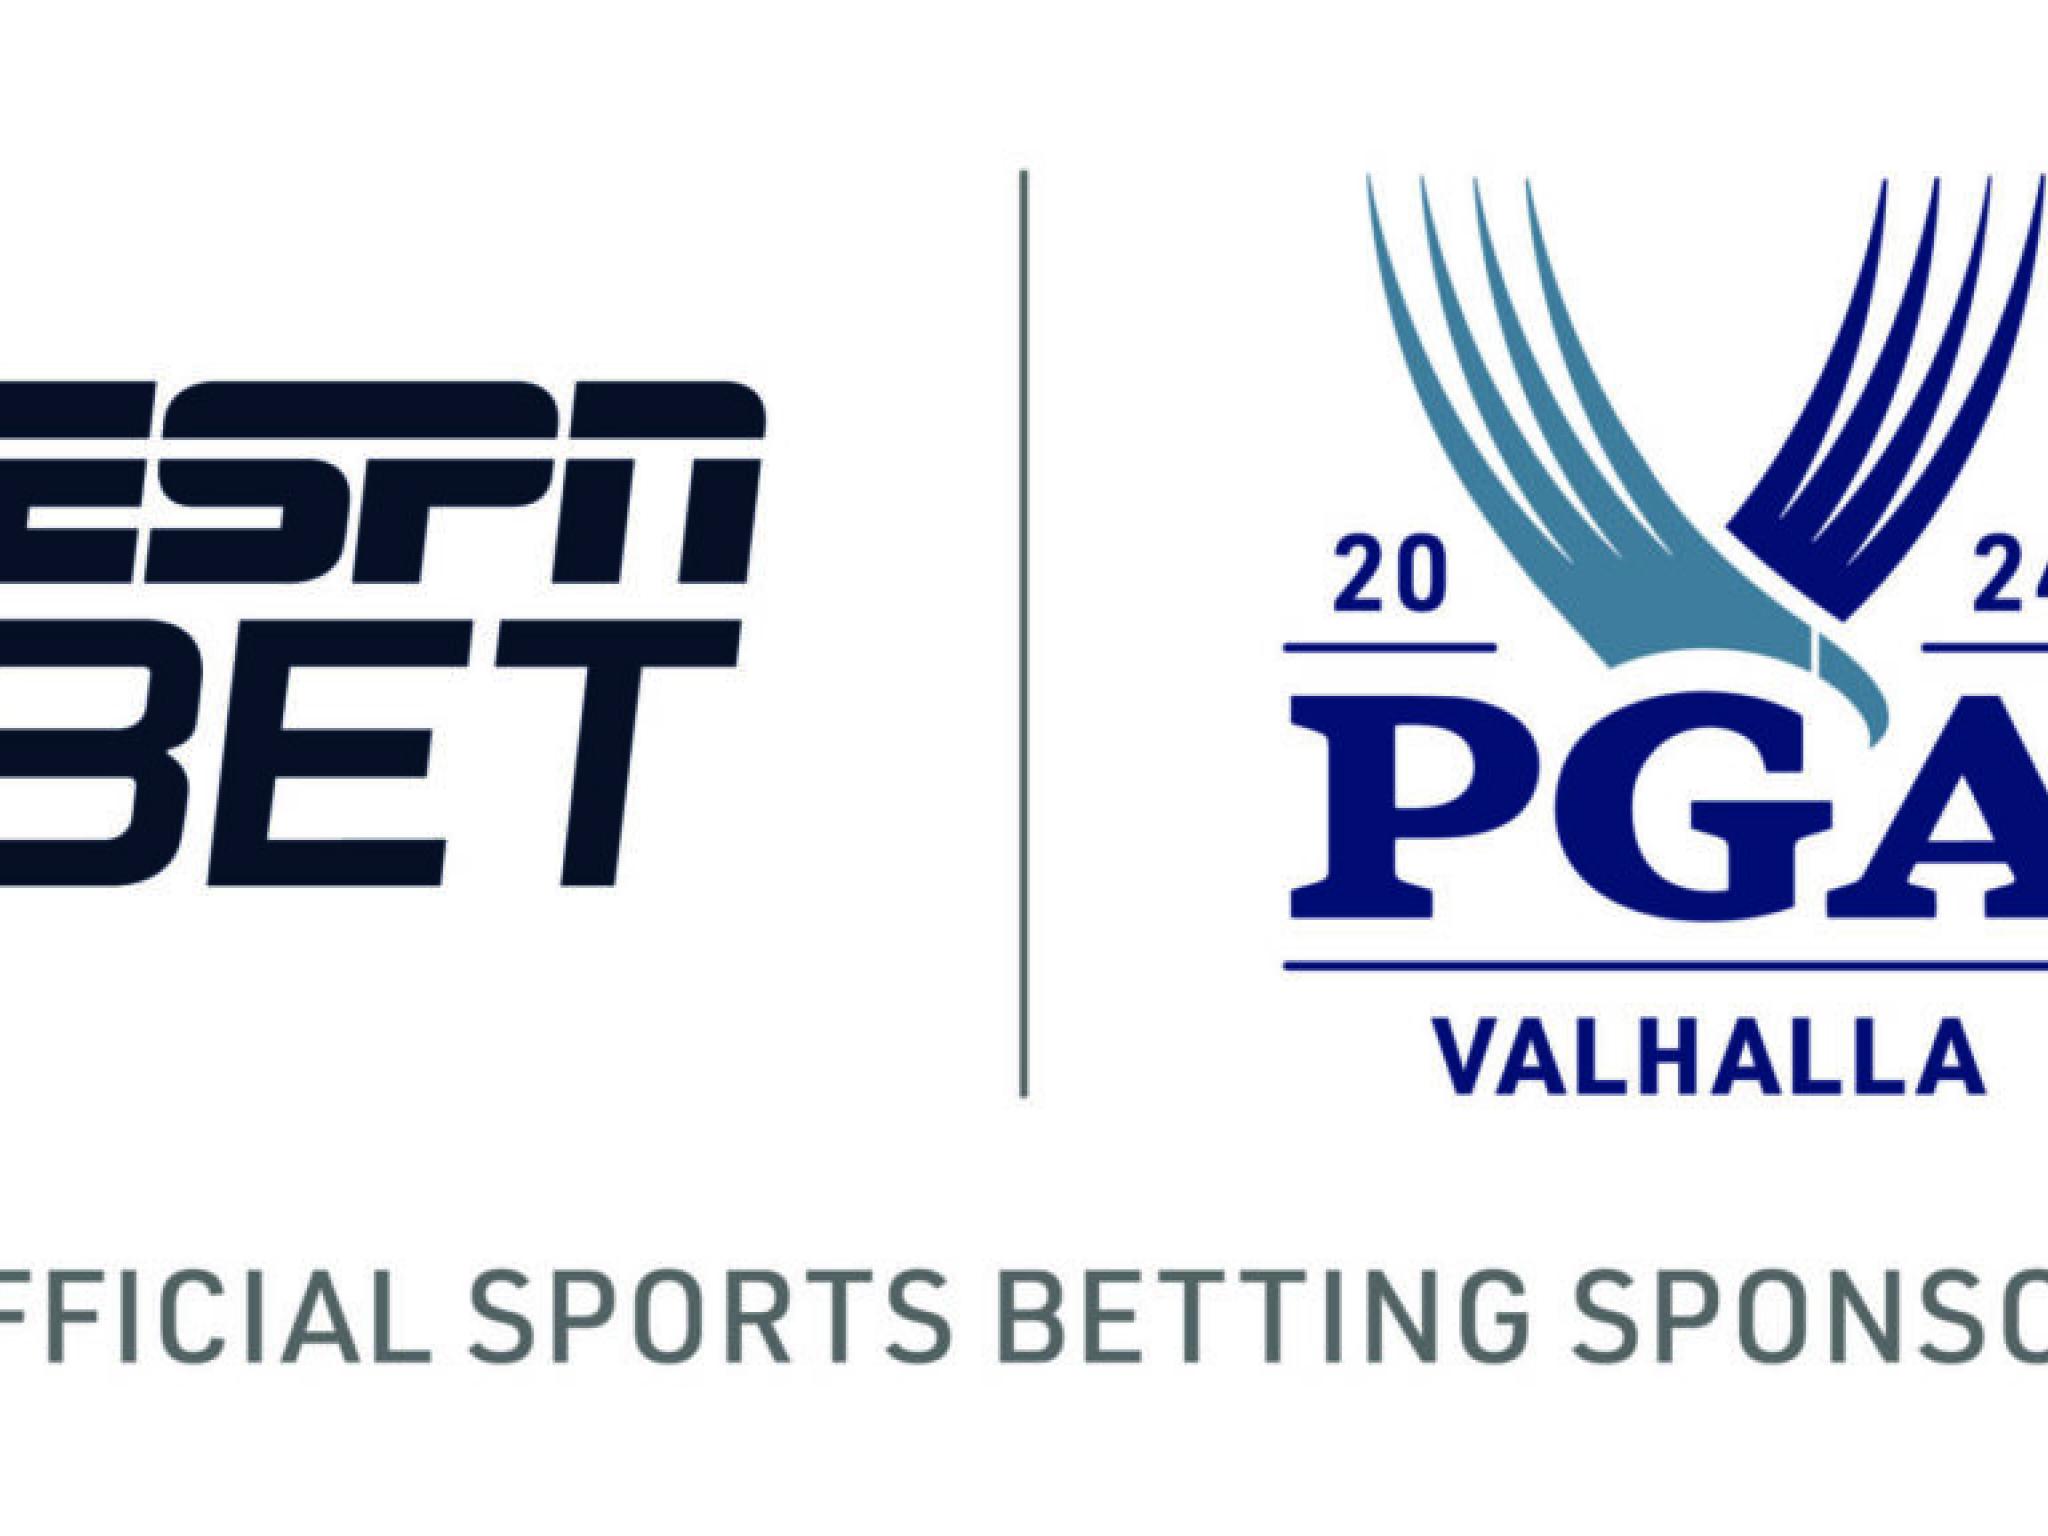  penn-entertainment-shares-jump-after-espn-bet-named-official-sports-betting-sponsor-of-pga-championship 